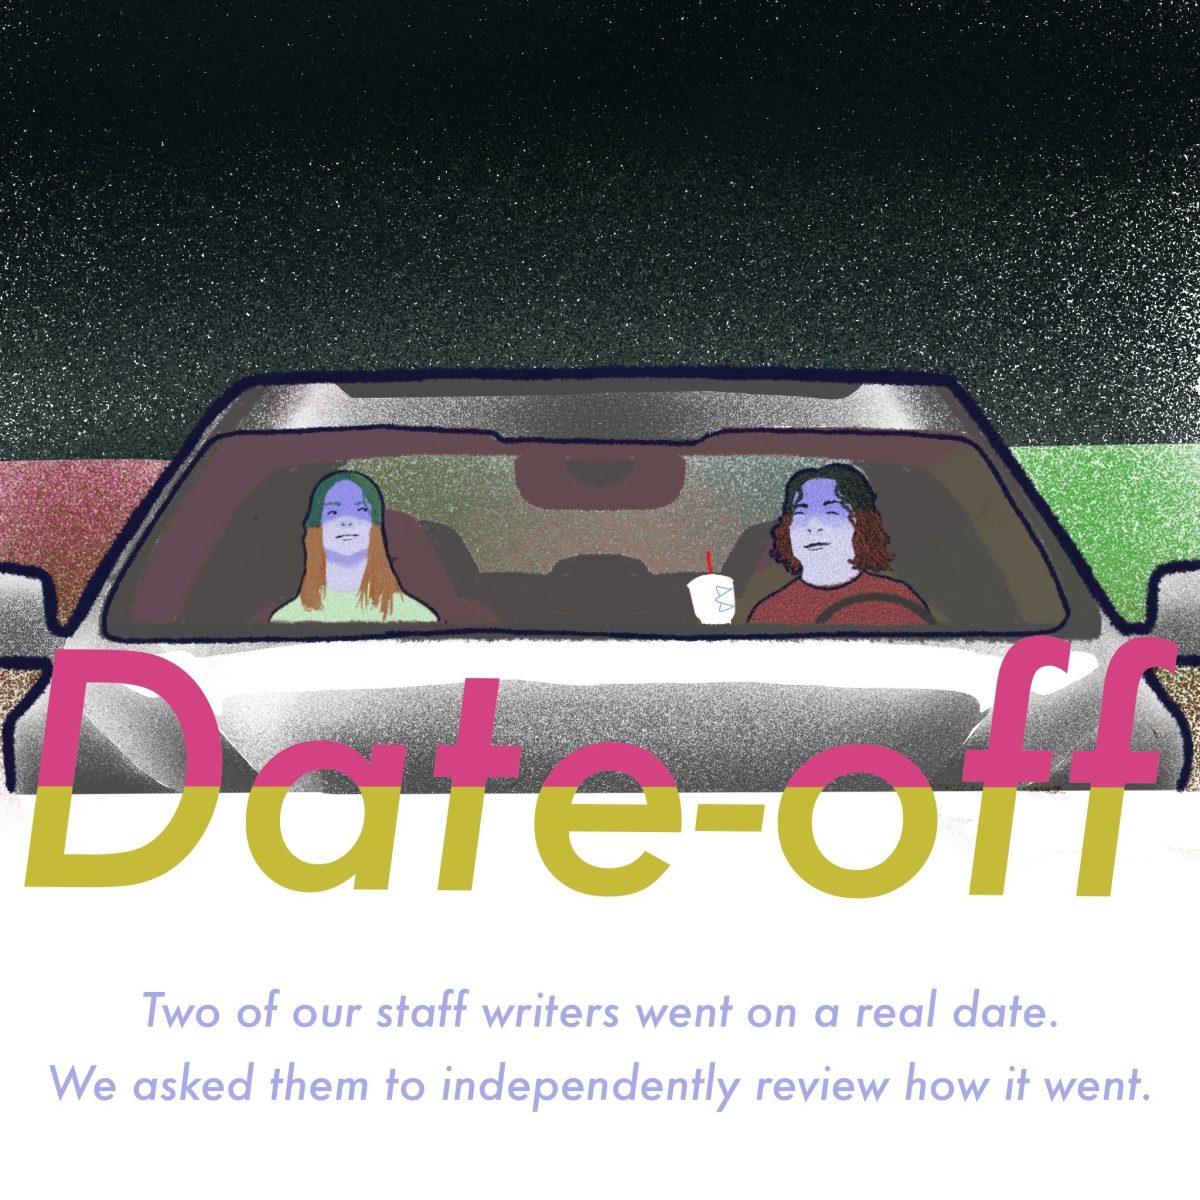 Two of our staff writers went on a date. We asked them to independently review how it went. To view a timelapse of this graphic, click here.